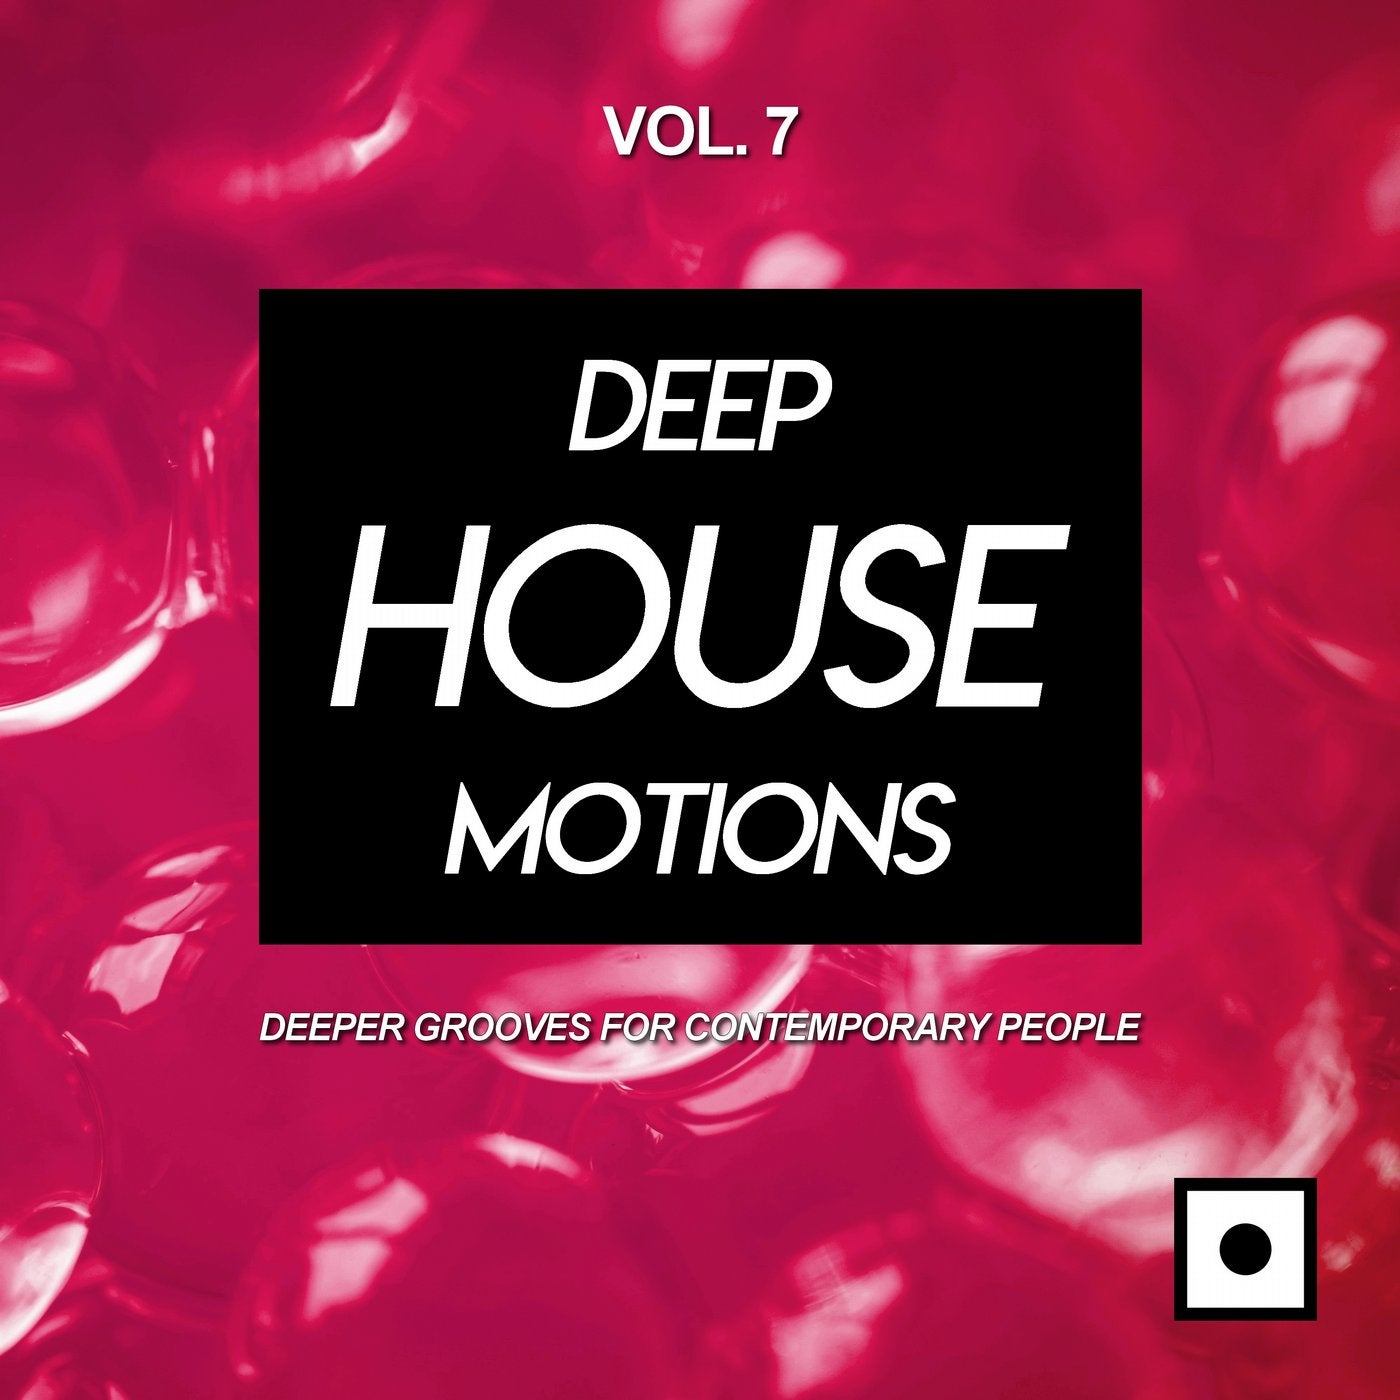 Deep House Motions, Vol. 7 (Deeper Grooves For Contemporary People)